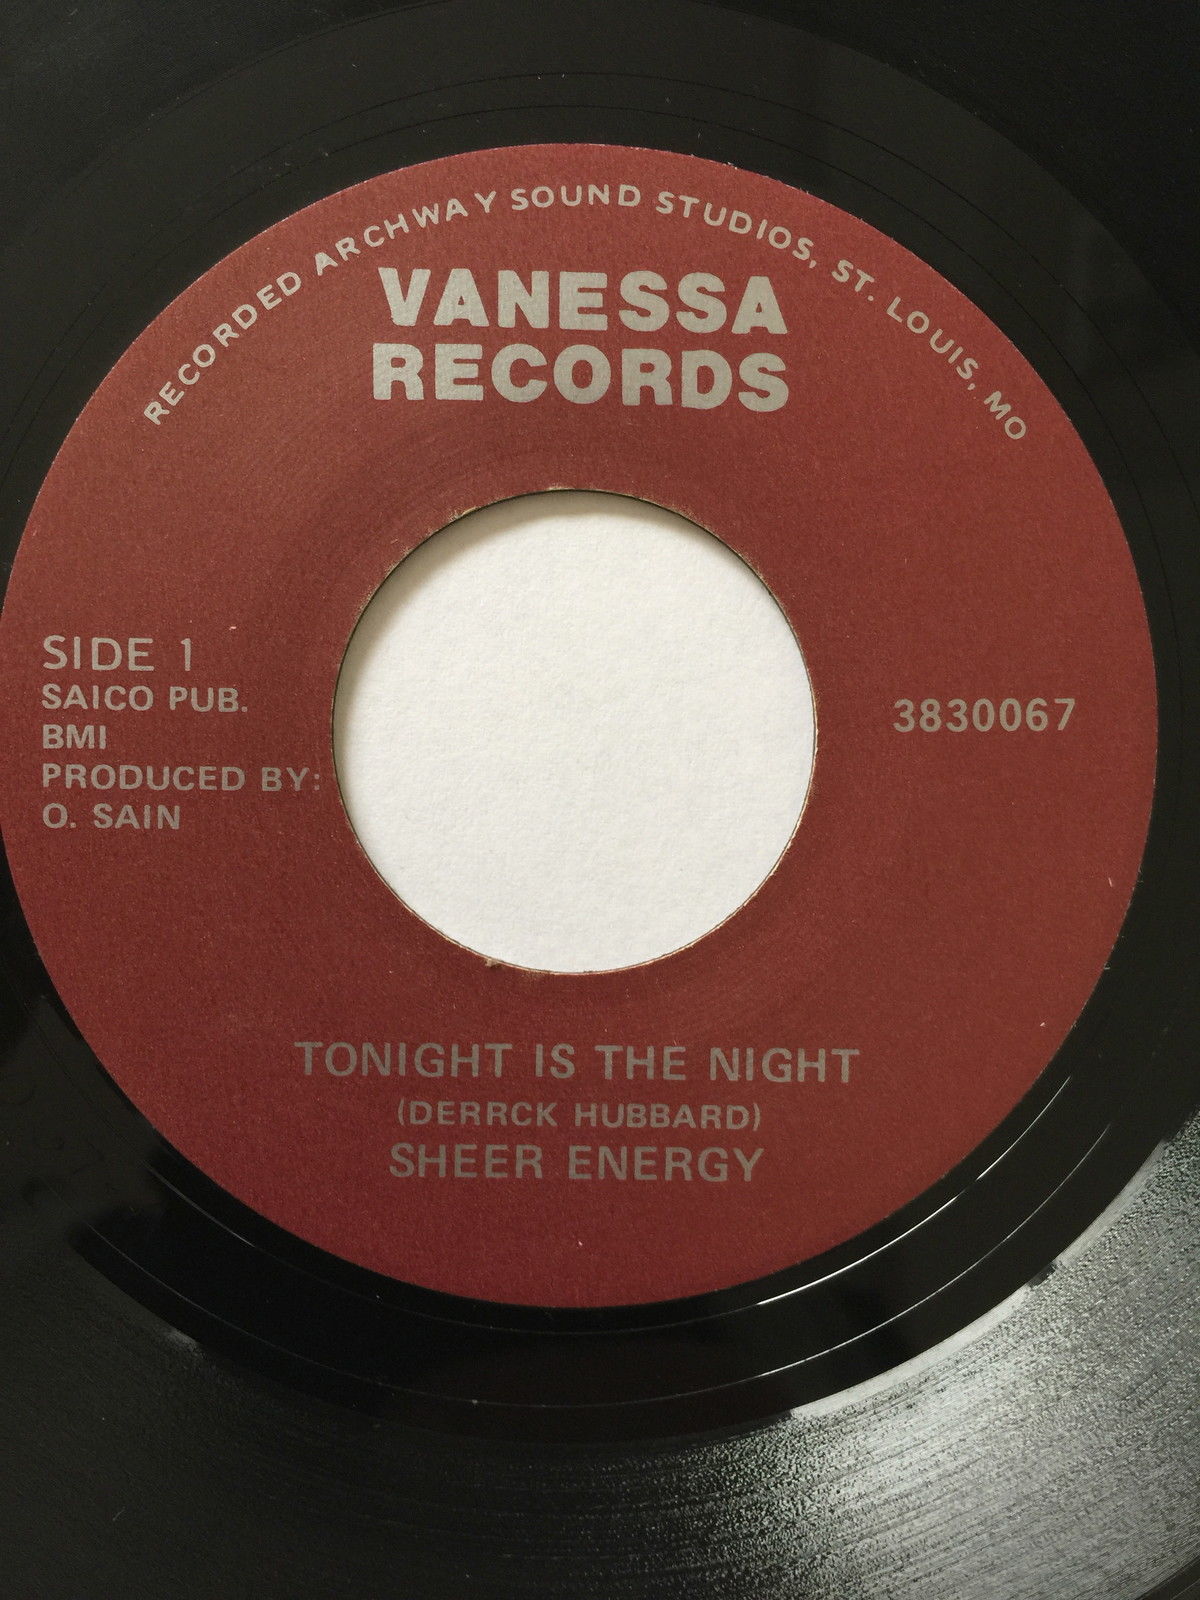  SHEER ENERGY, TONIGHT IS THE NIGHT, RARE MODERN SOUL 45 -  auction details